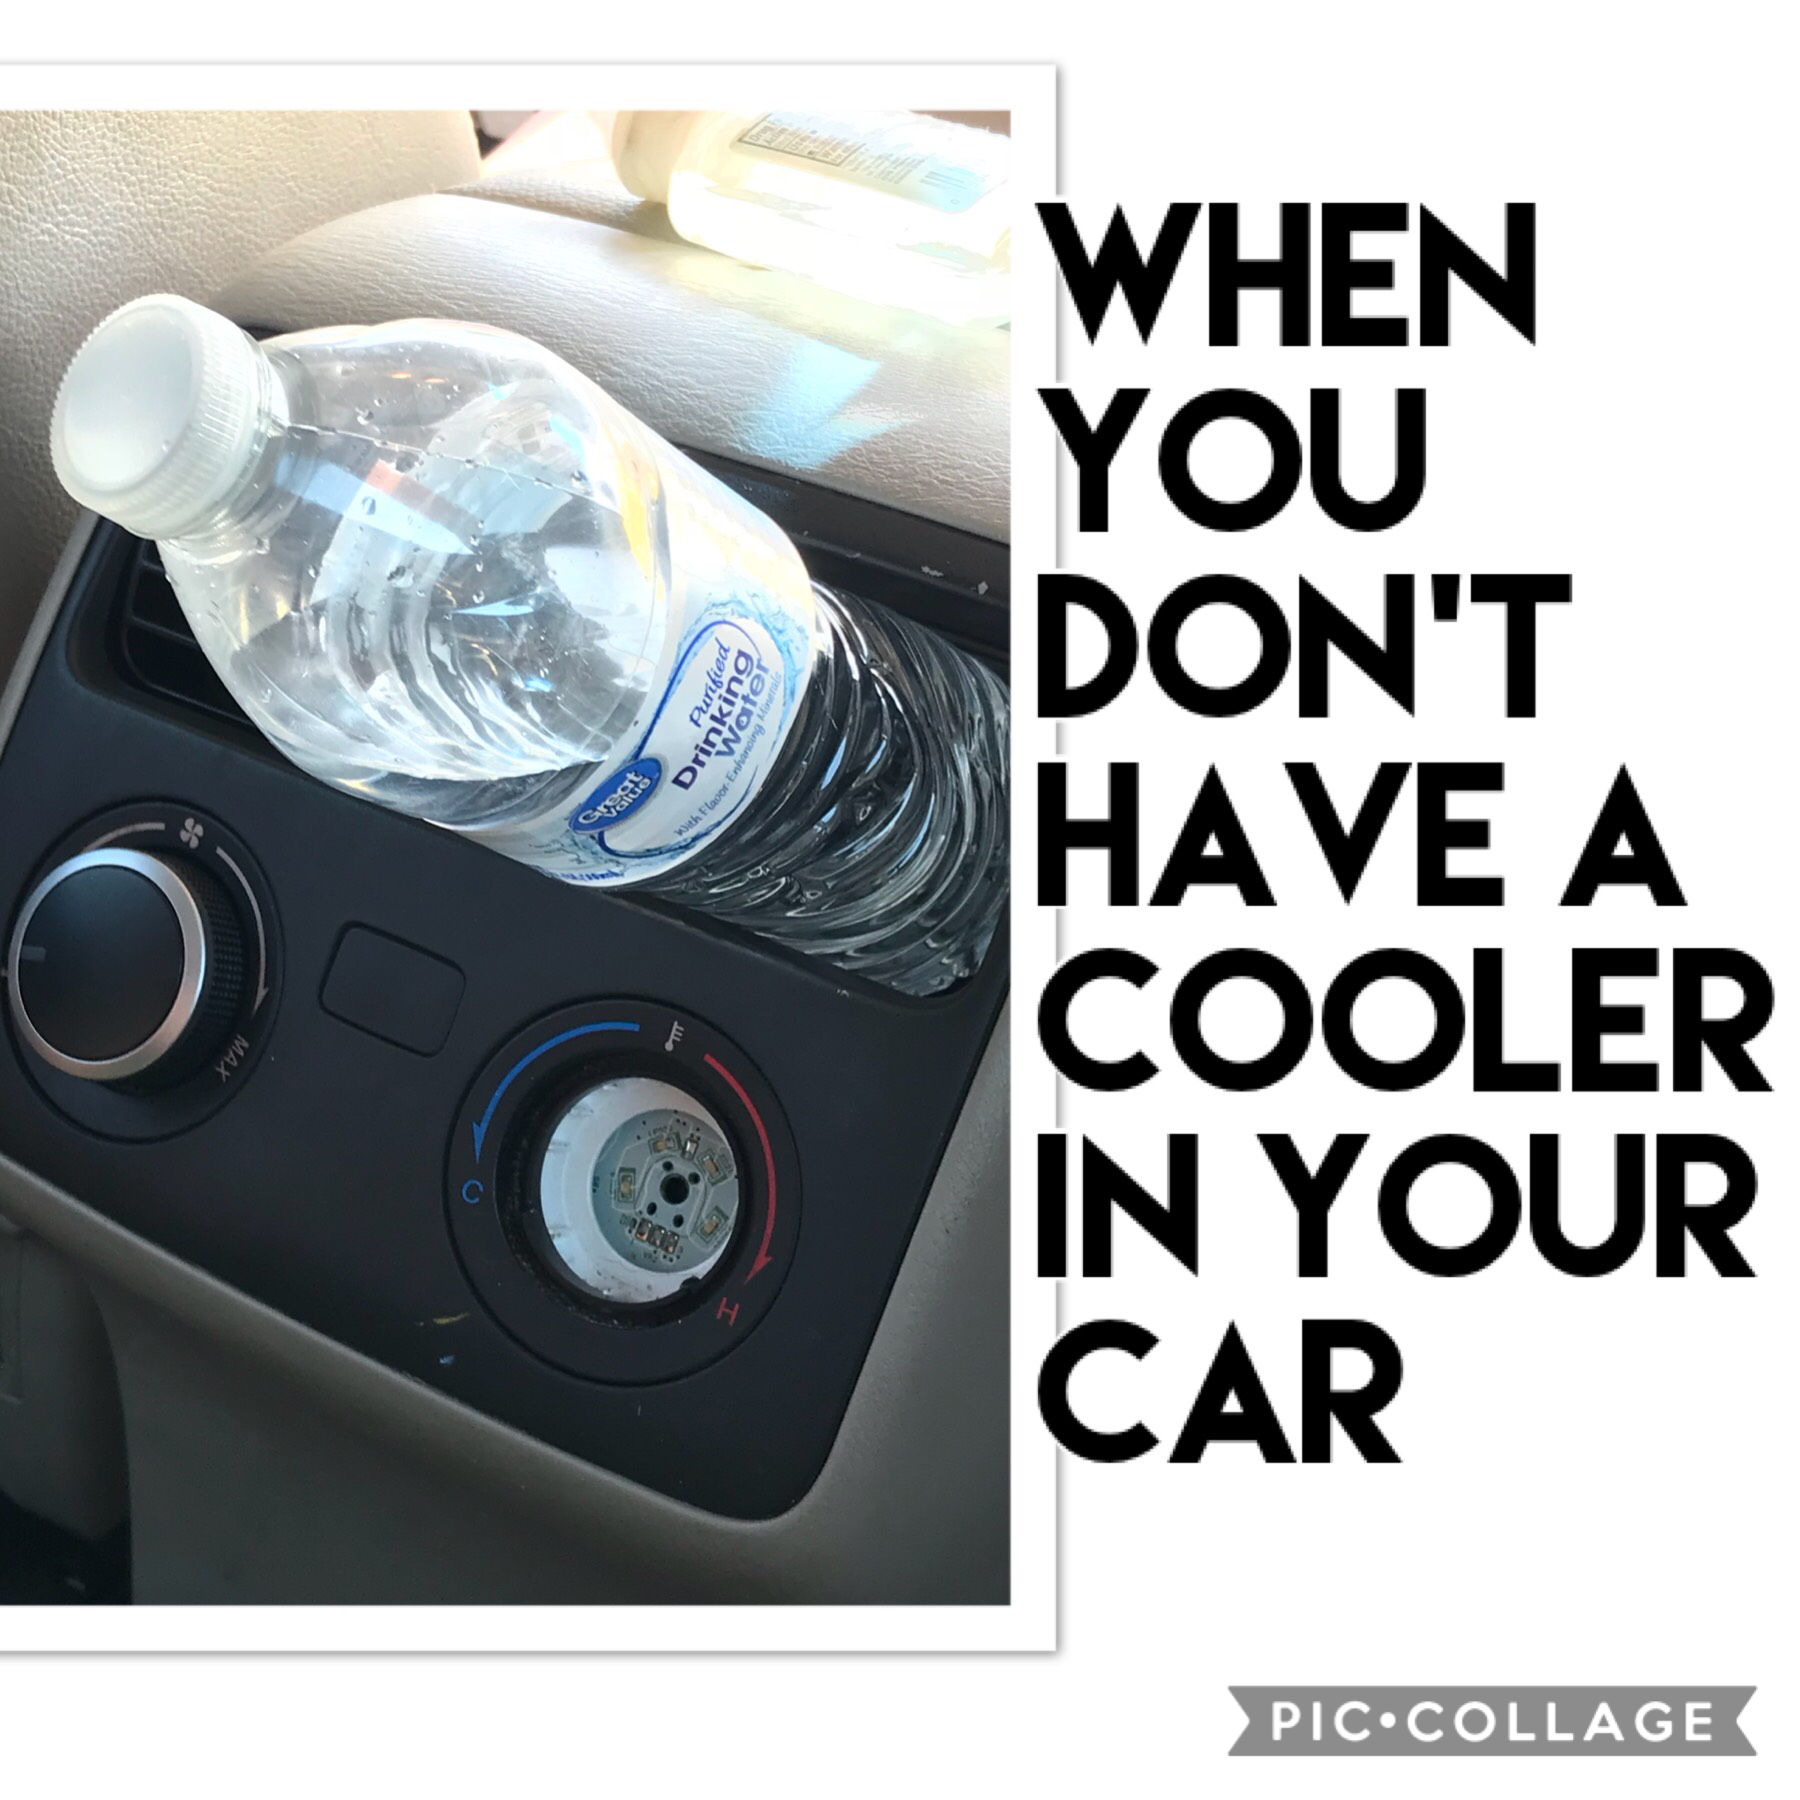 Life Hacks 4 life

Story: I left my water in the car and it heated it up, so I had the idea of putting my water bottle in the air vent. NOTE: my air vent was already broken and one of the pieces fell off allowing me to do so. (DONT go break your car to ha